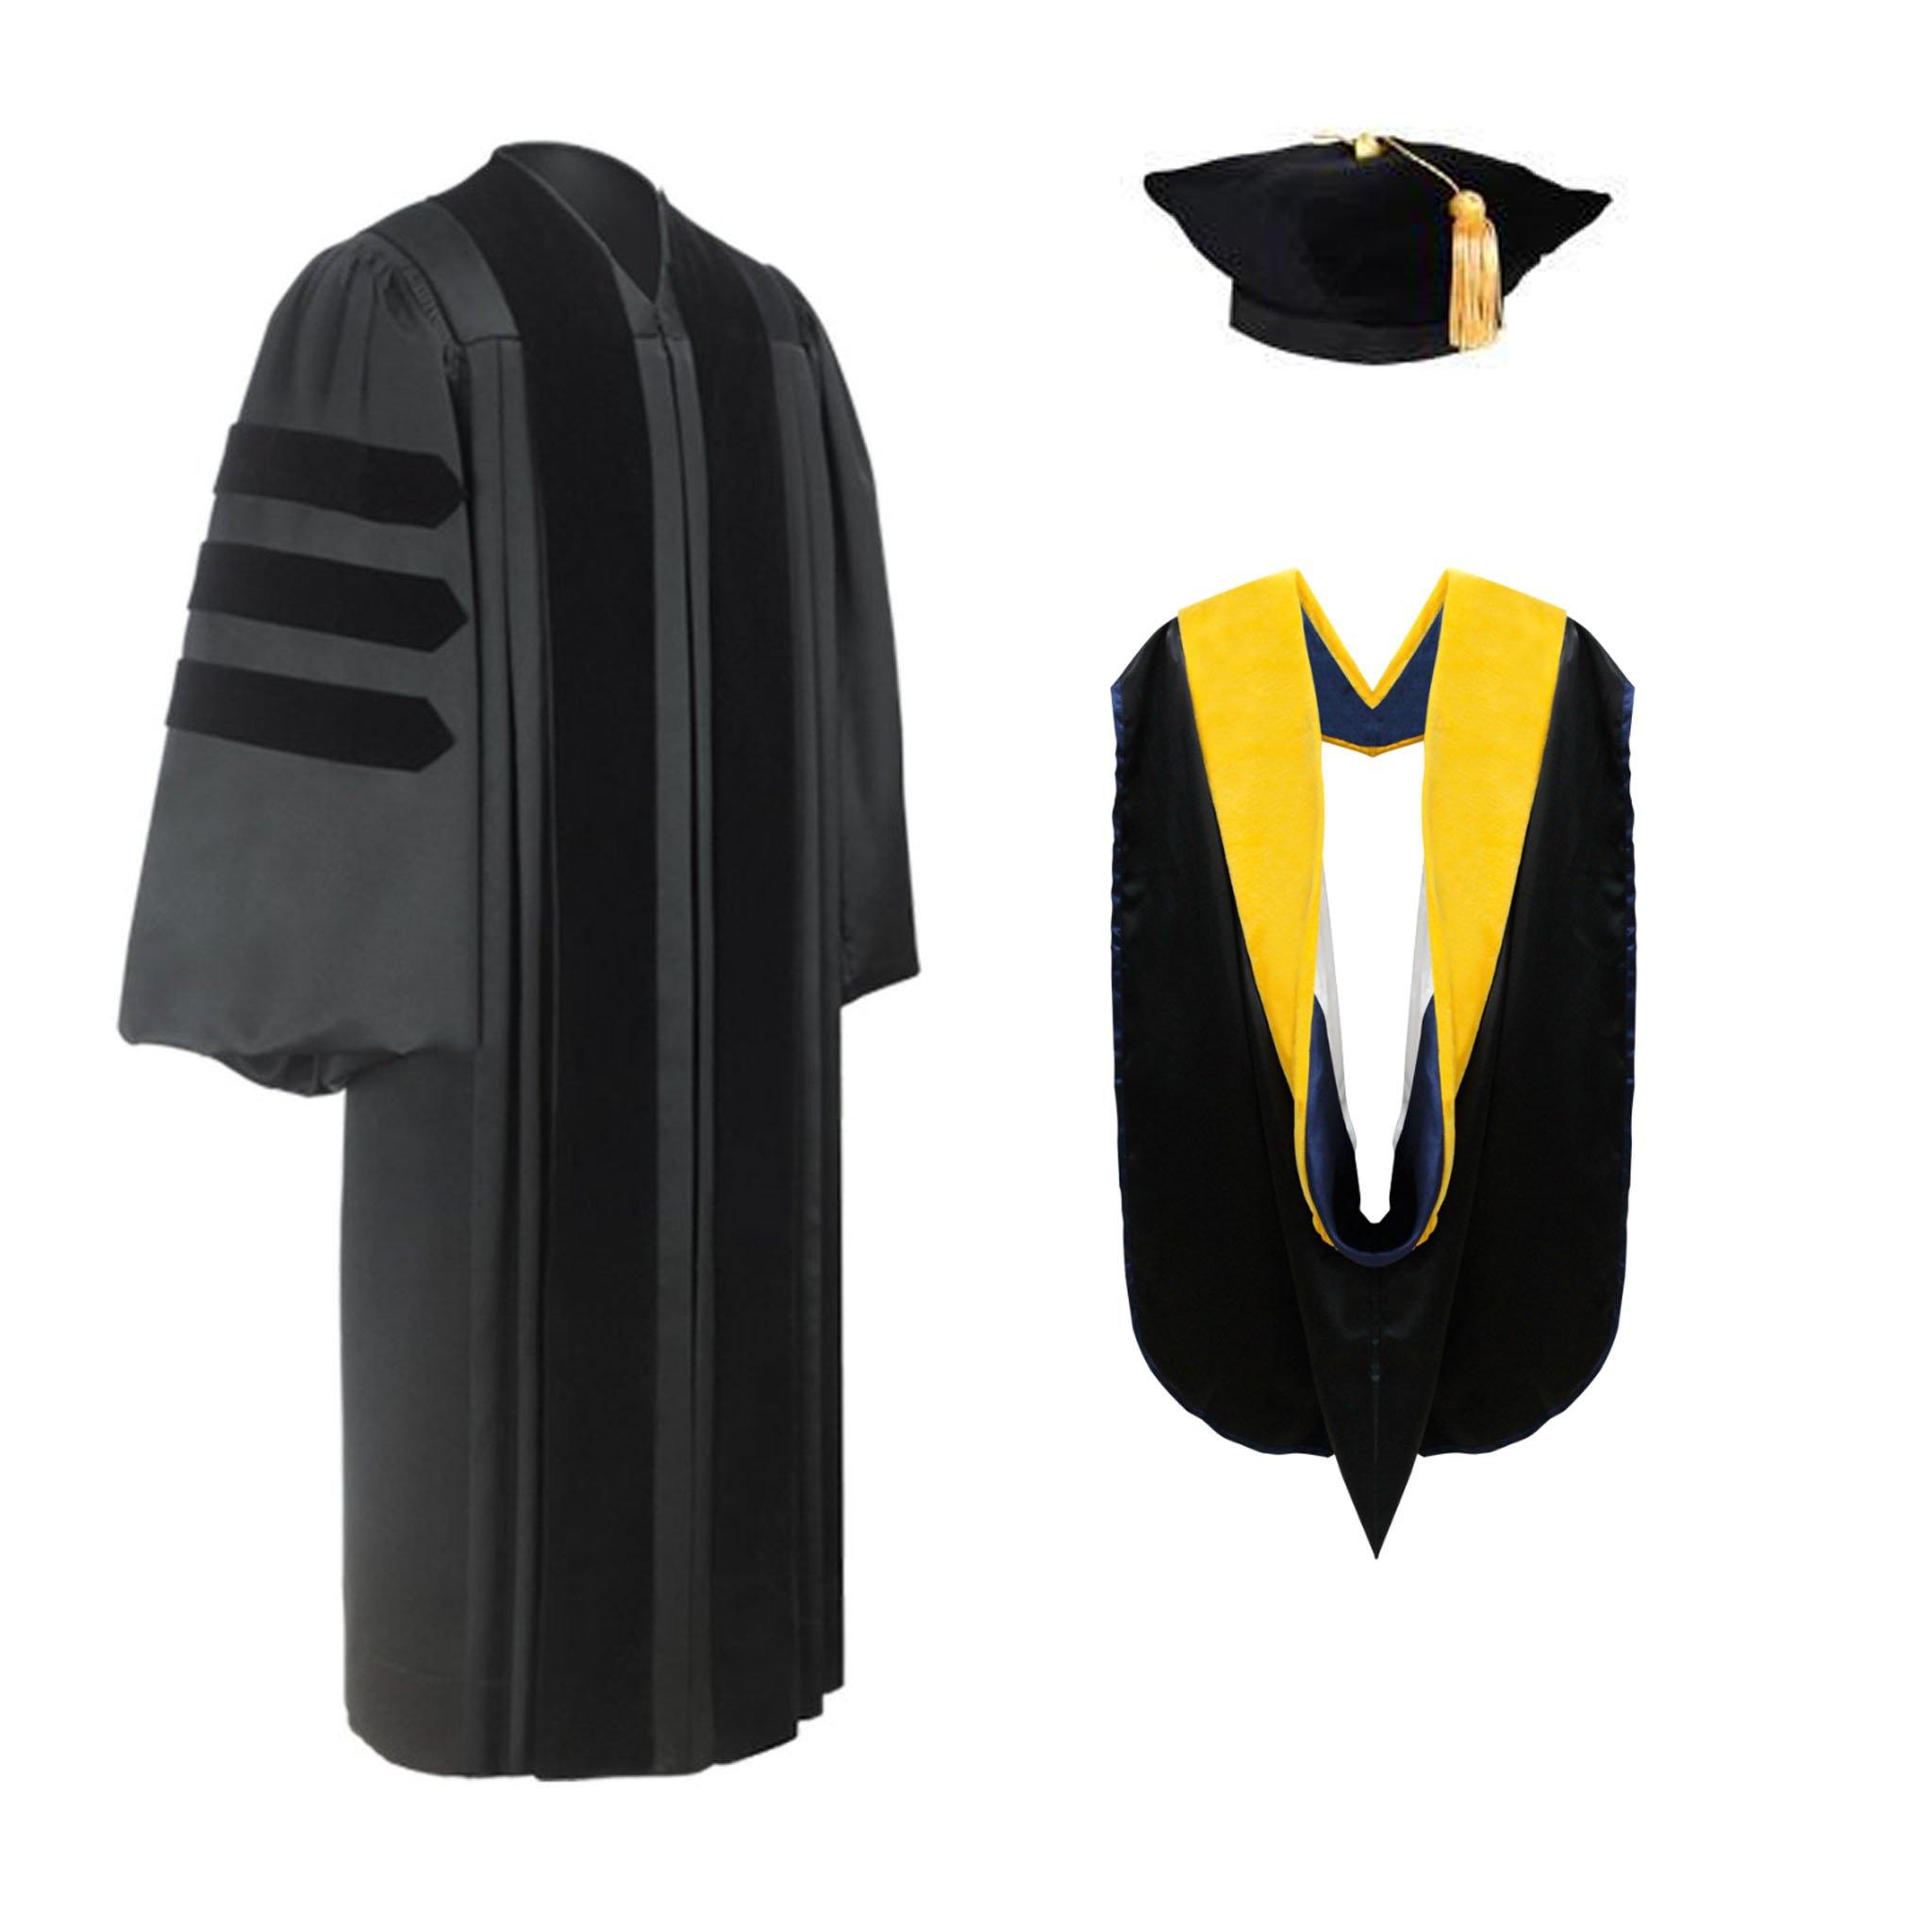 Buy BookMyCostume Black Graduate Convocation Degree Graduation Day Gown  Kids Fancy Dress Costume 7-8 years Online at Low Prices in India - Amazon.in